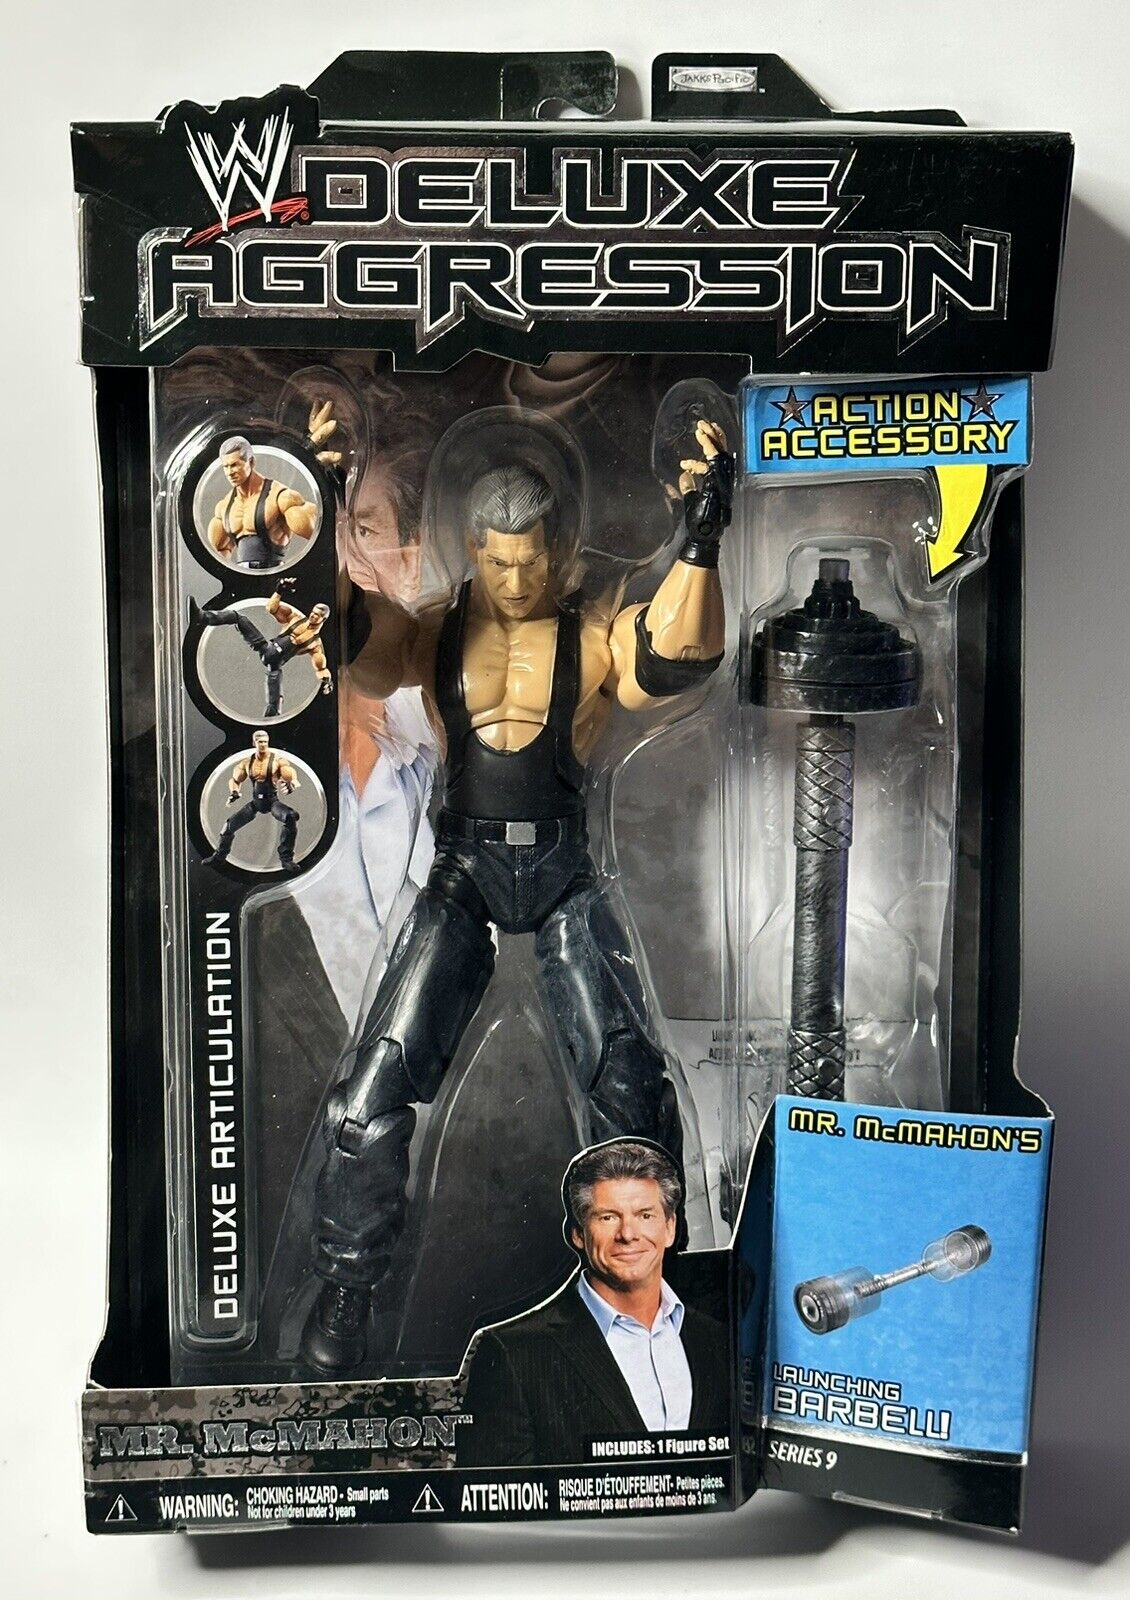 2007 WWE Jakks Pacific Deluxe Aggression Series 9 Mr. McMahon